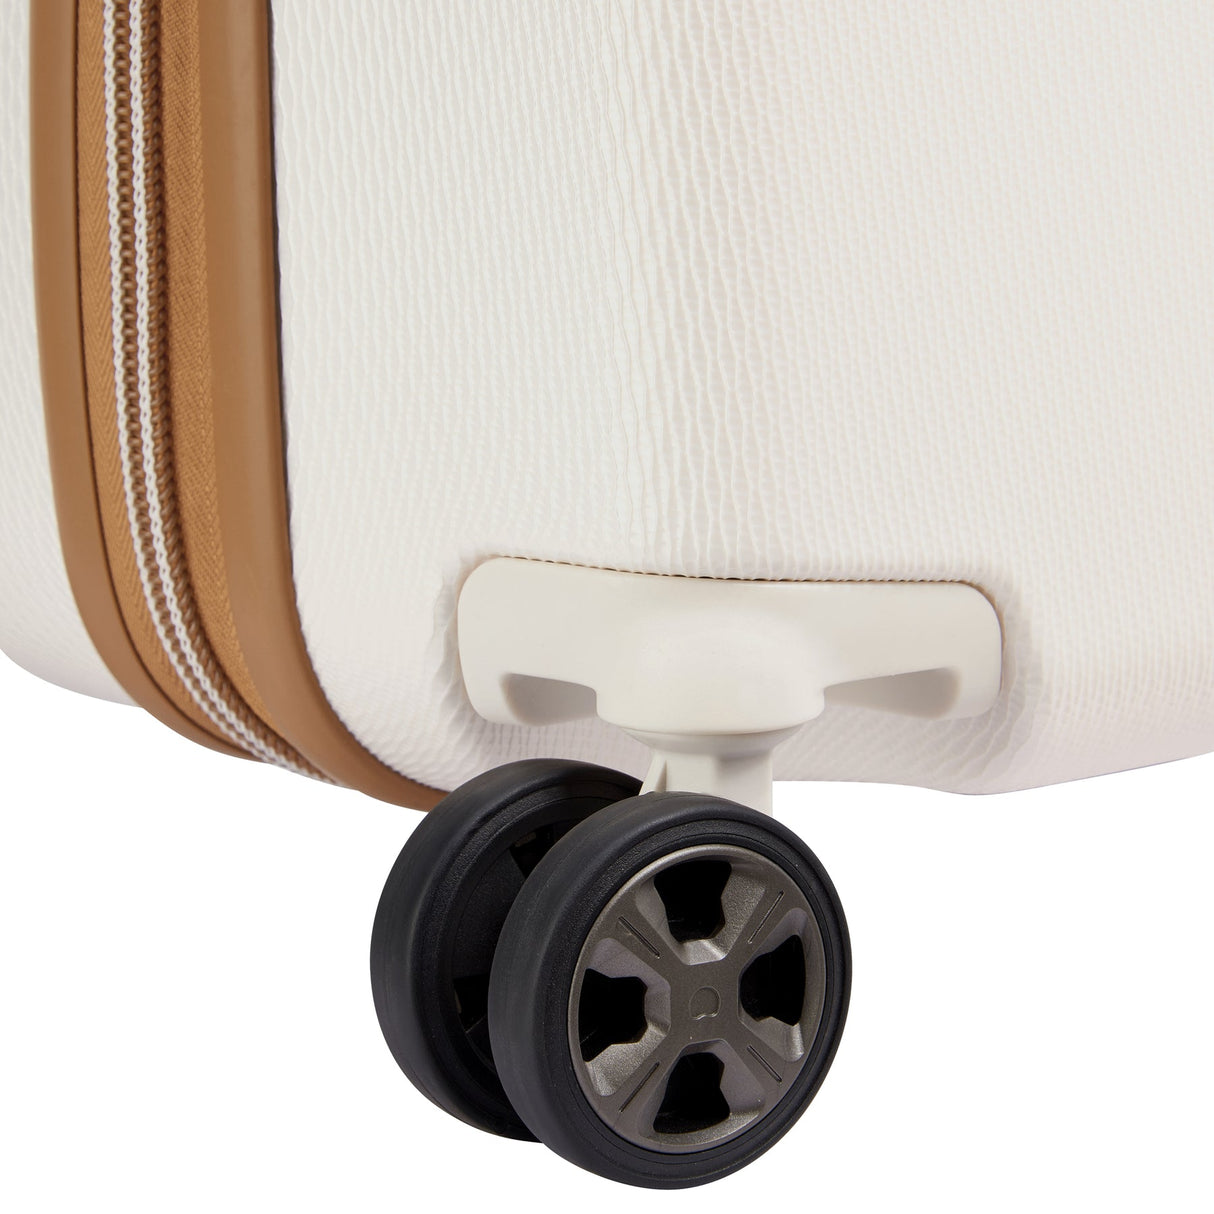 Delsey Chatelet Air 2.0 Carry-On Spinner , , delsey-chatelet-air-2.0-40167680515-13_1800x1800_87fa004a-f183-4a28-8449-b85d2d80ab4b